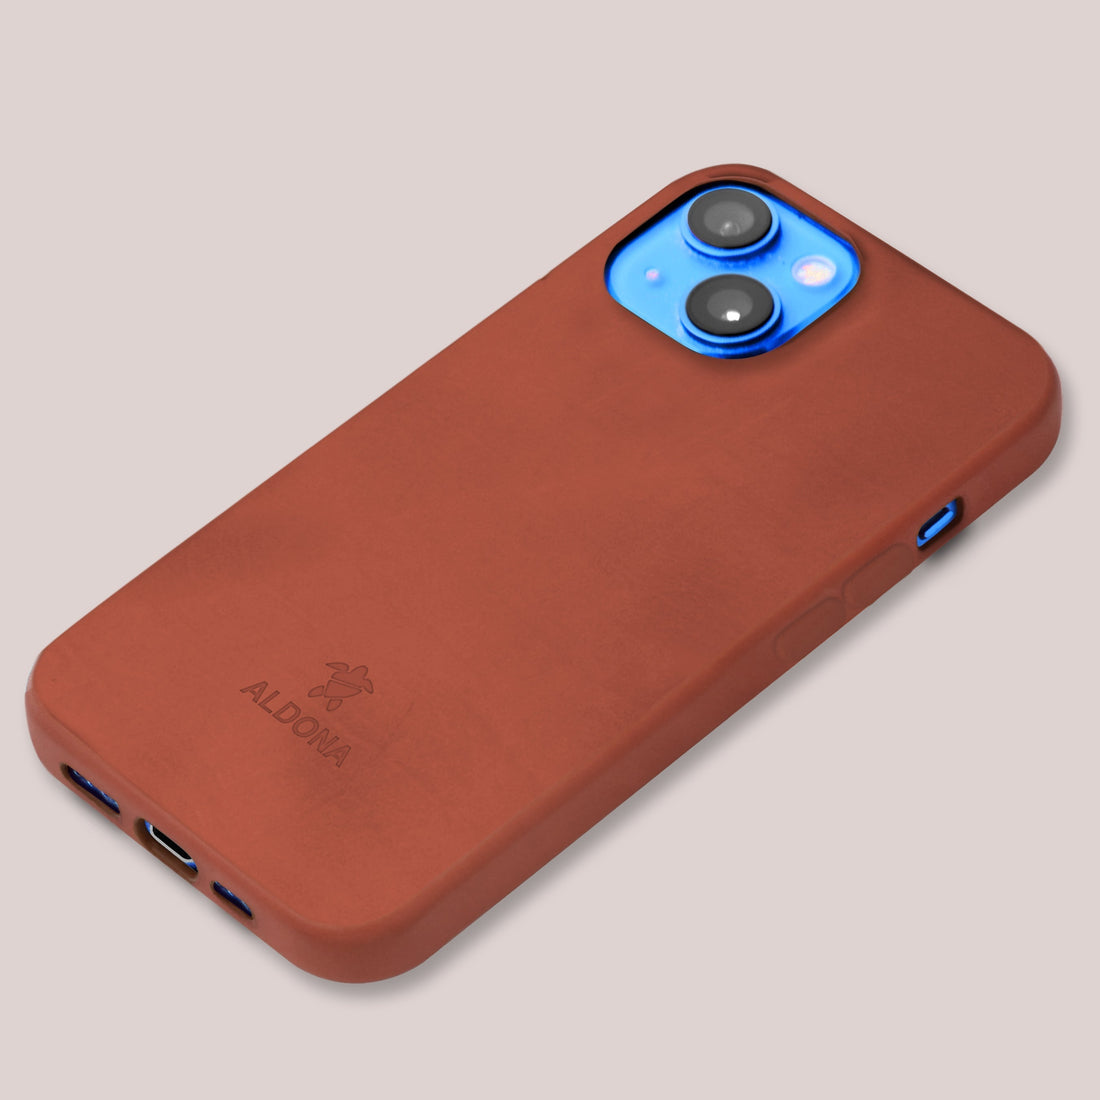 Kalon Case for iPhone 13 Pro Max with MagSafe Compatibility - Burnt Tobacco